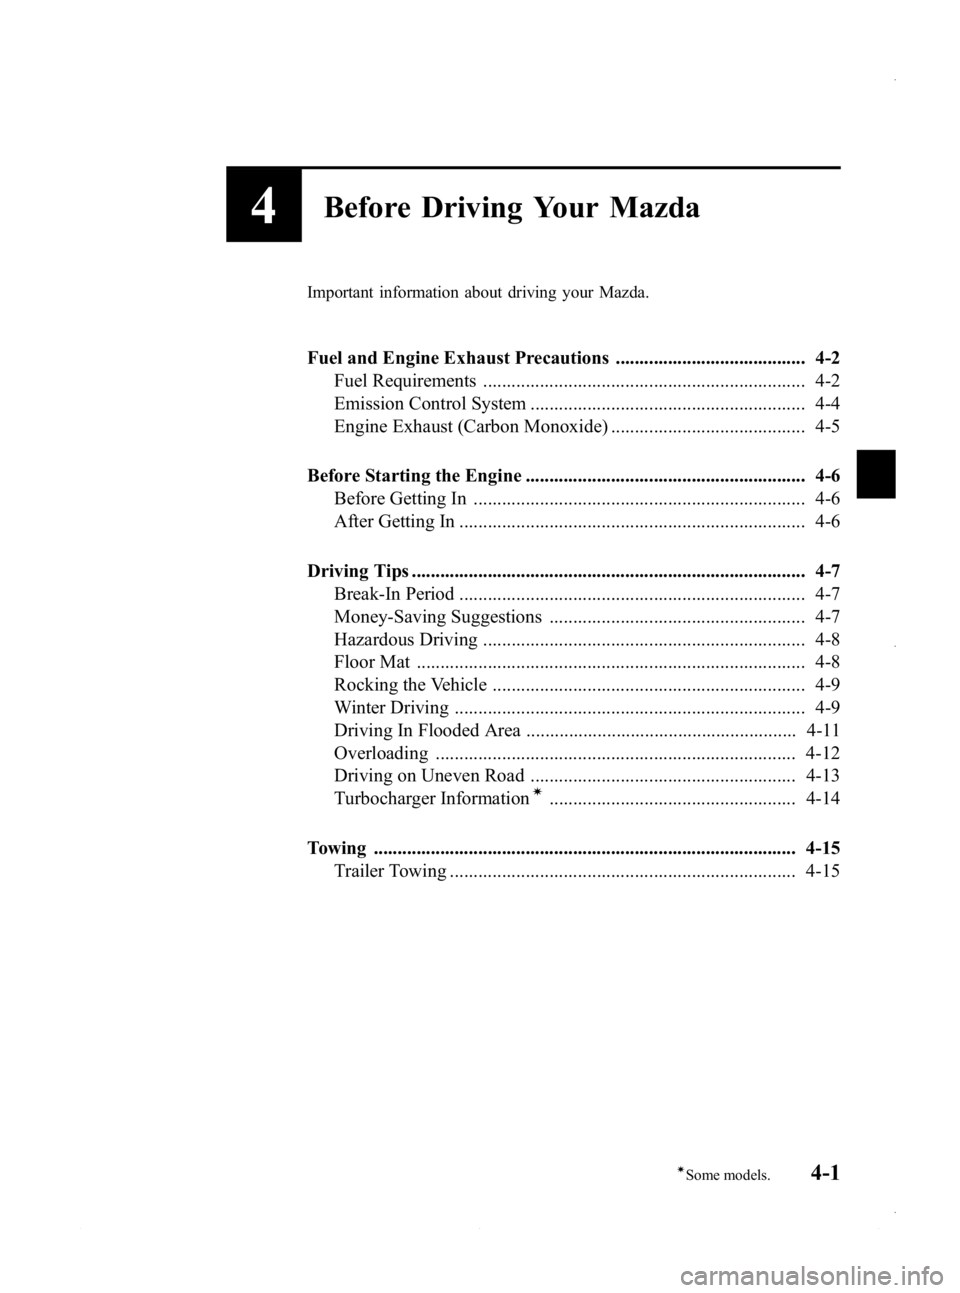 MAZDA MODEL 3 5-DOOR 2013  Owners Manual Black plate (147,1)
4Before Driving Your Mazda
Important information about driving your Mazda.
Fuel and Engine Exhaust Precautions ........................................ 4-2Fuel Requirements .......